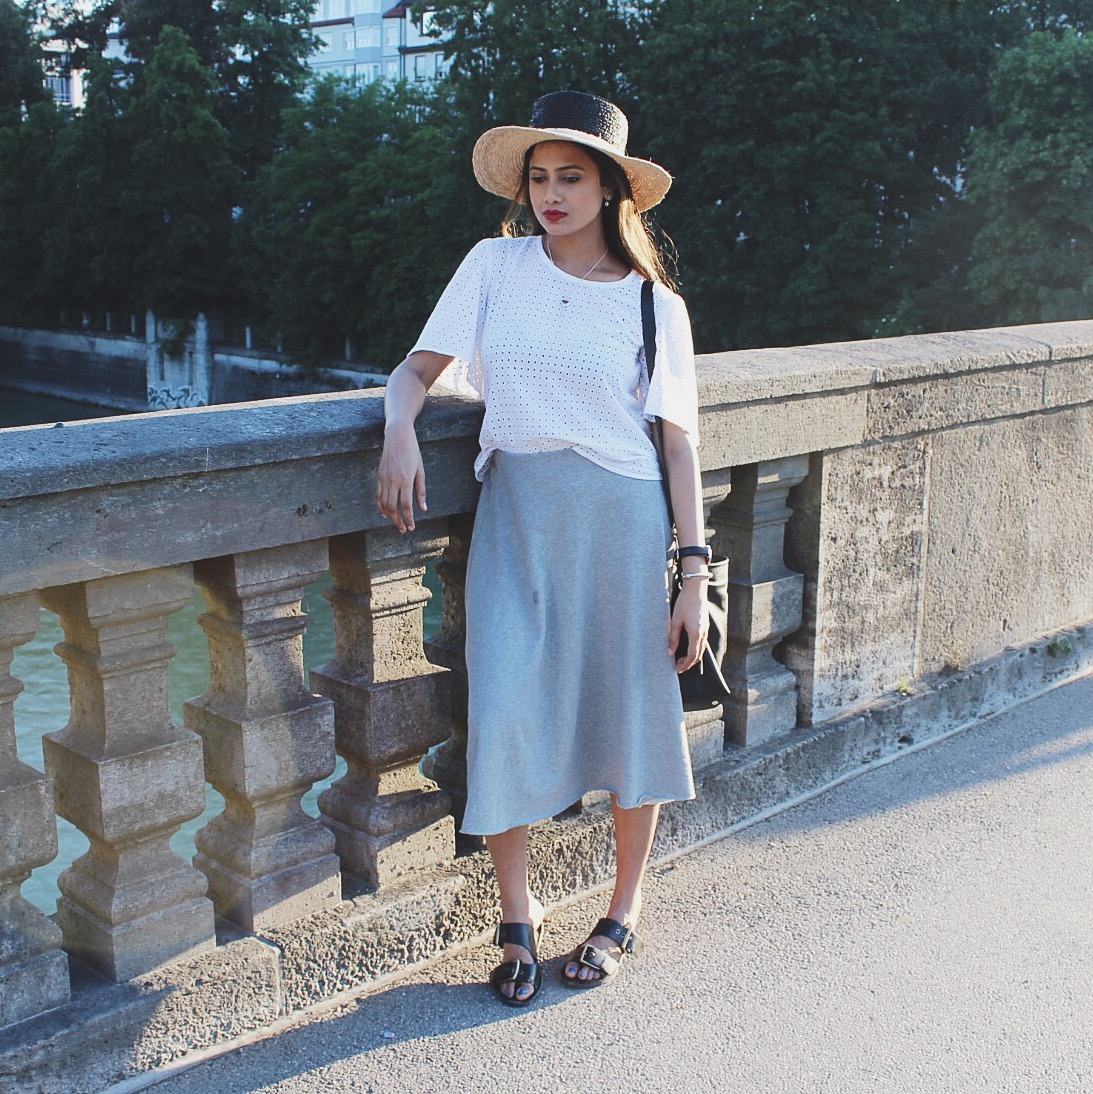 comfy chic, cool color palette, effortless chic, match jewelry, neutral outfit, parisian chic, popular silver jewelry, dress for exploring, dress while traveling, dress sightseeing, 2016 street style, 2016 neutral outfit, london street style, style hat, fresh outfit, style neutrals, top indian blogger, uk blogger, white and grey, style slides, classic outfit idea